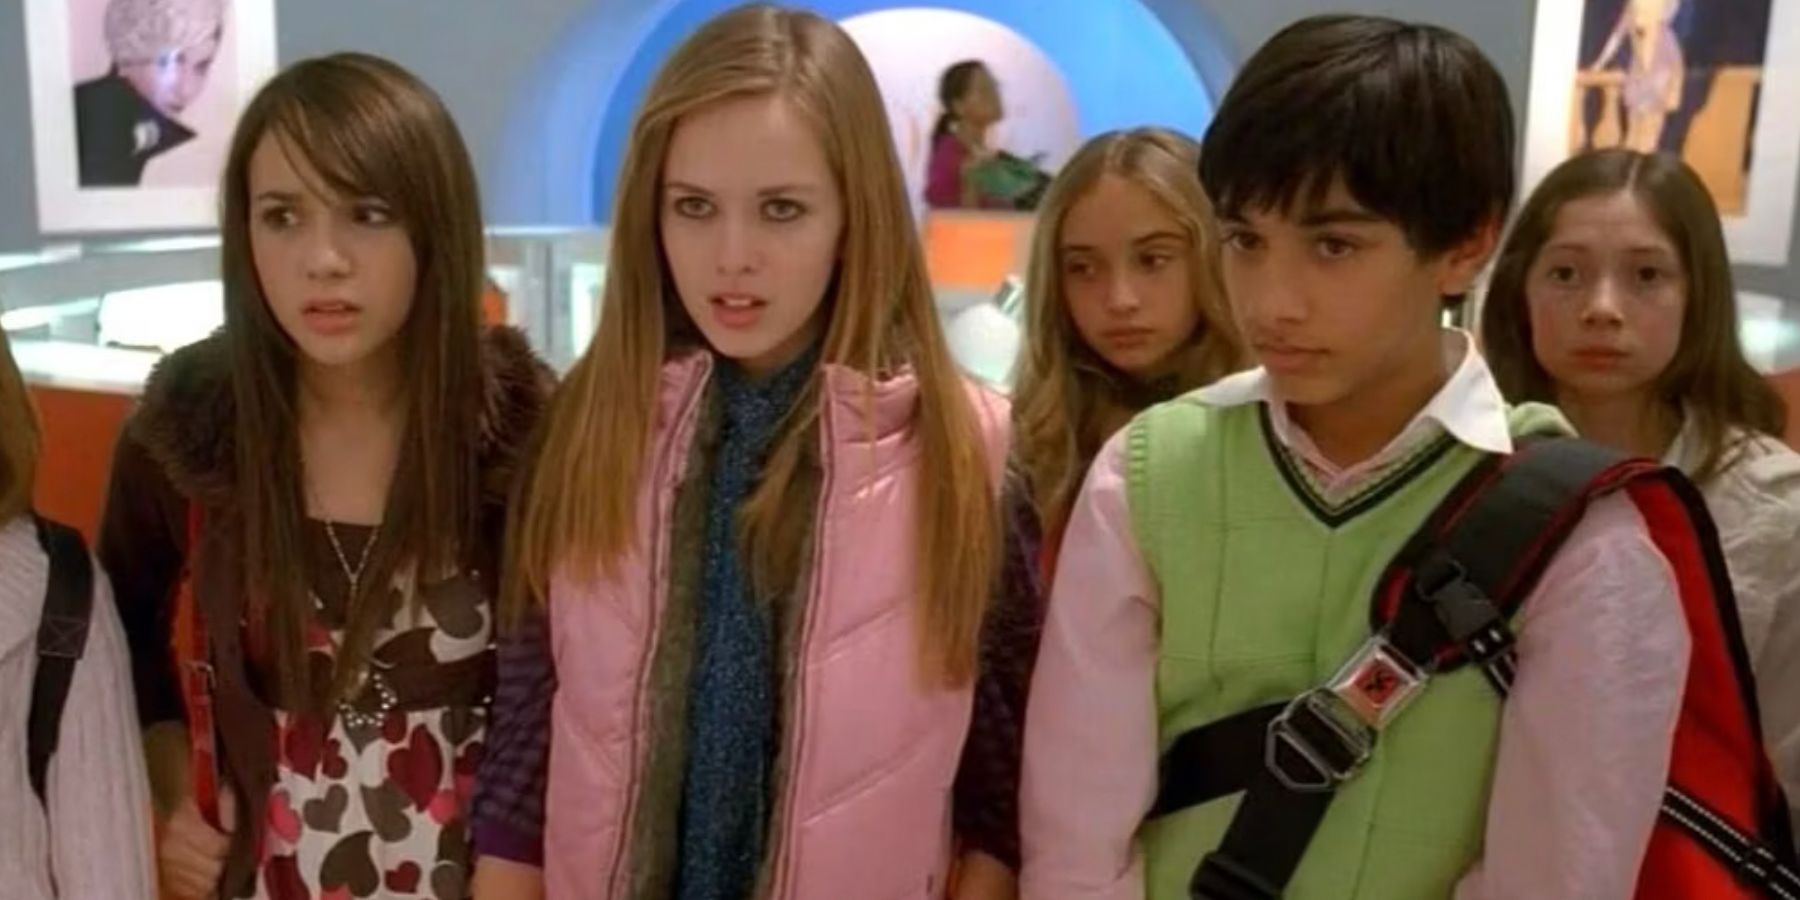 Justin and a few teen girls visit the MODE office in Ugly Betty